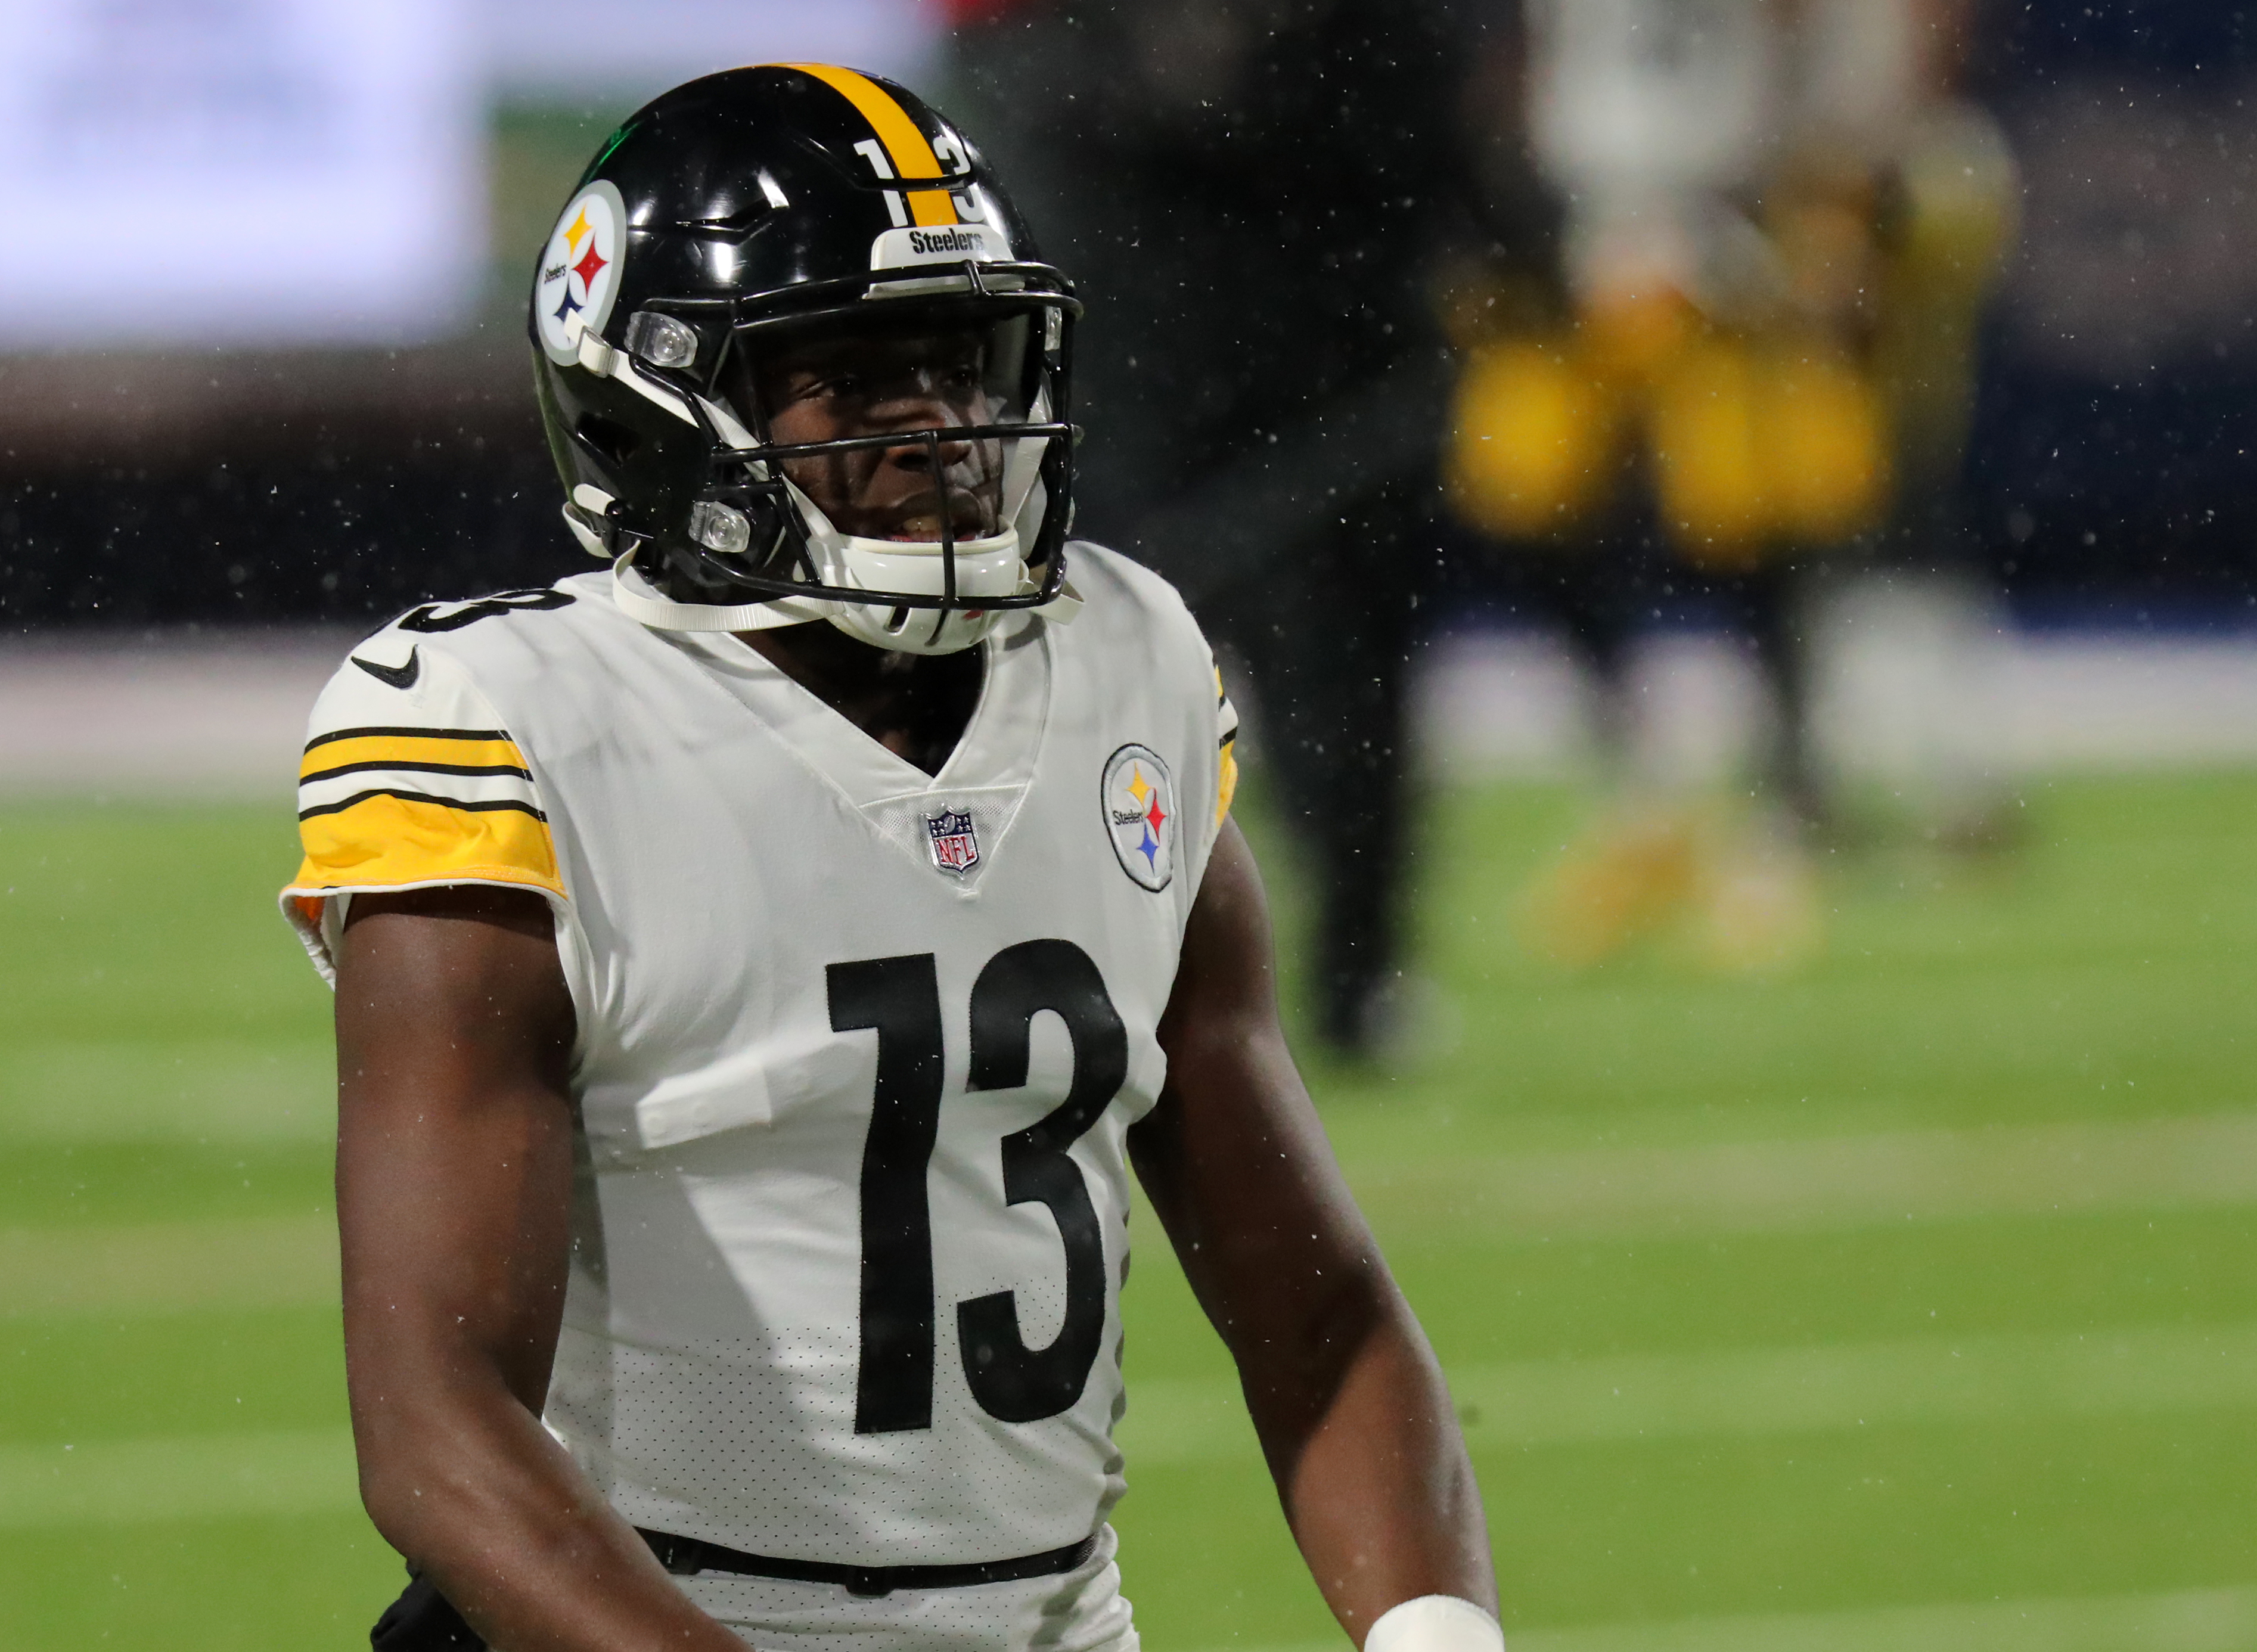 James Washington Hasn't Requested Trade Despite Rumors, Steelers' Mike Tomlin Says